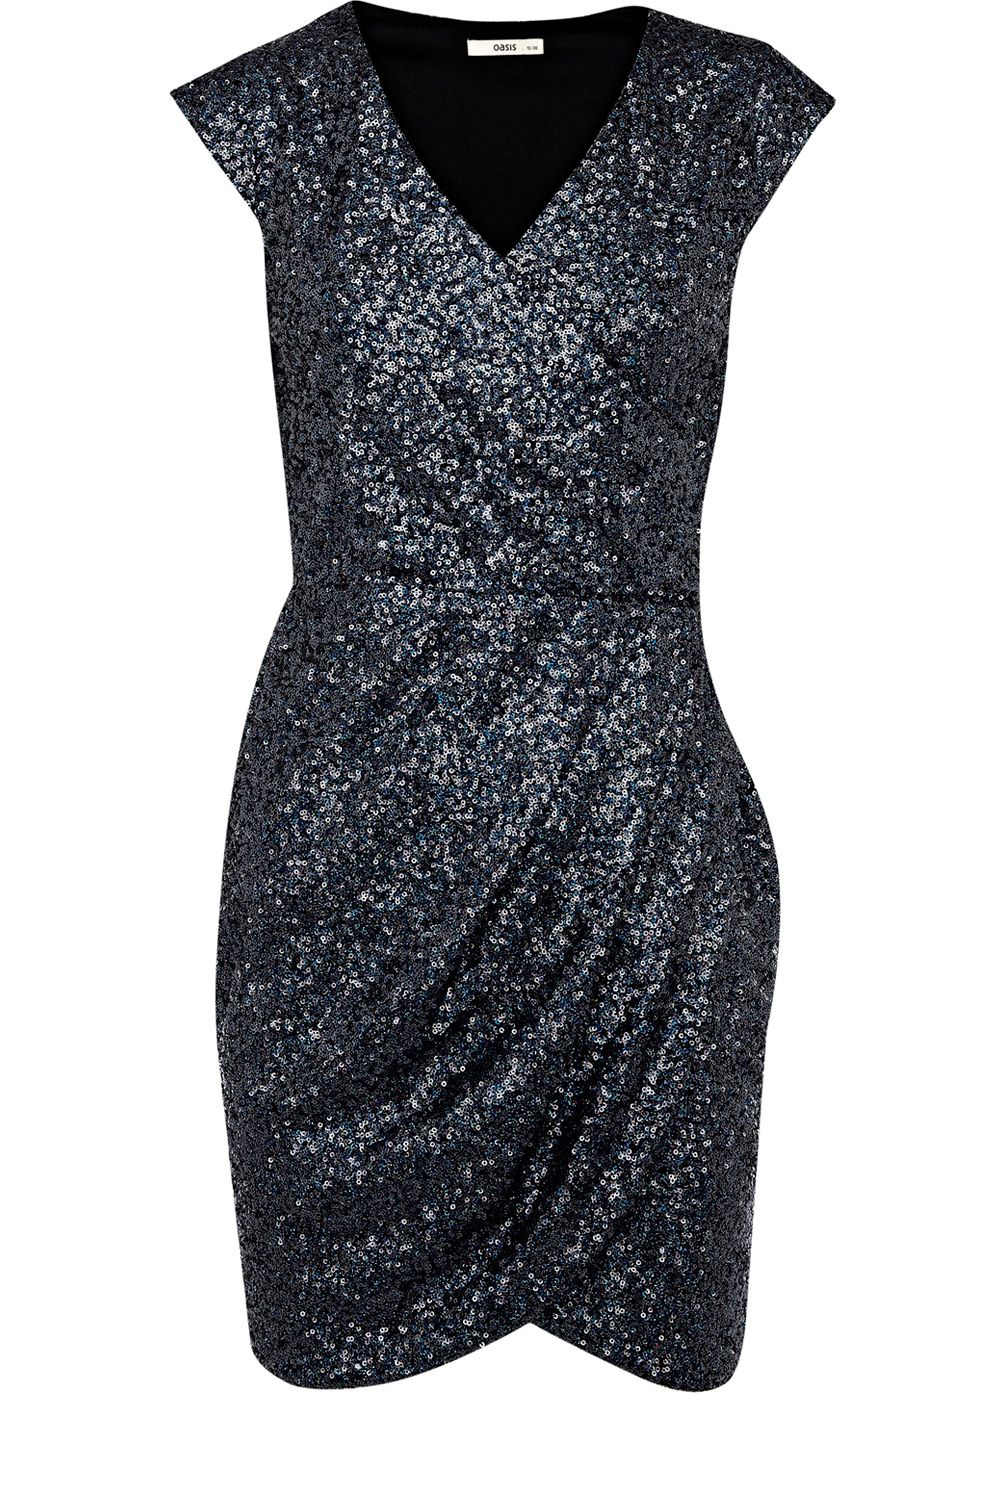 Oasis Sequin Bodycon Dress in Blue | Lyst